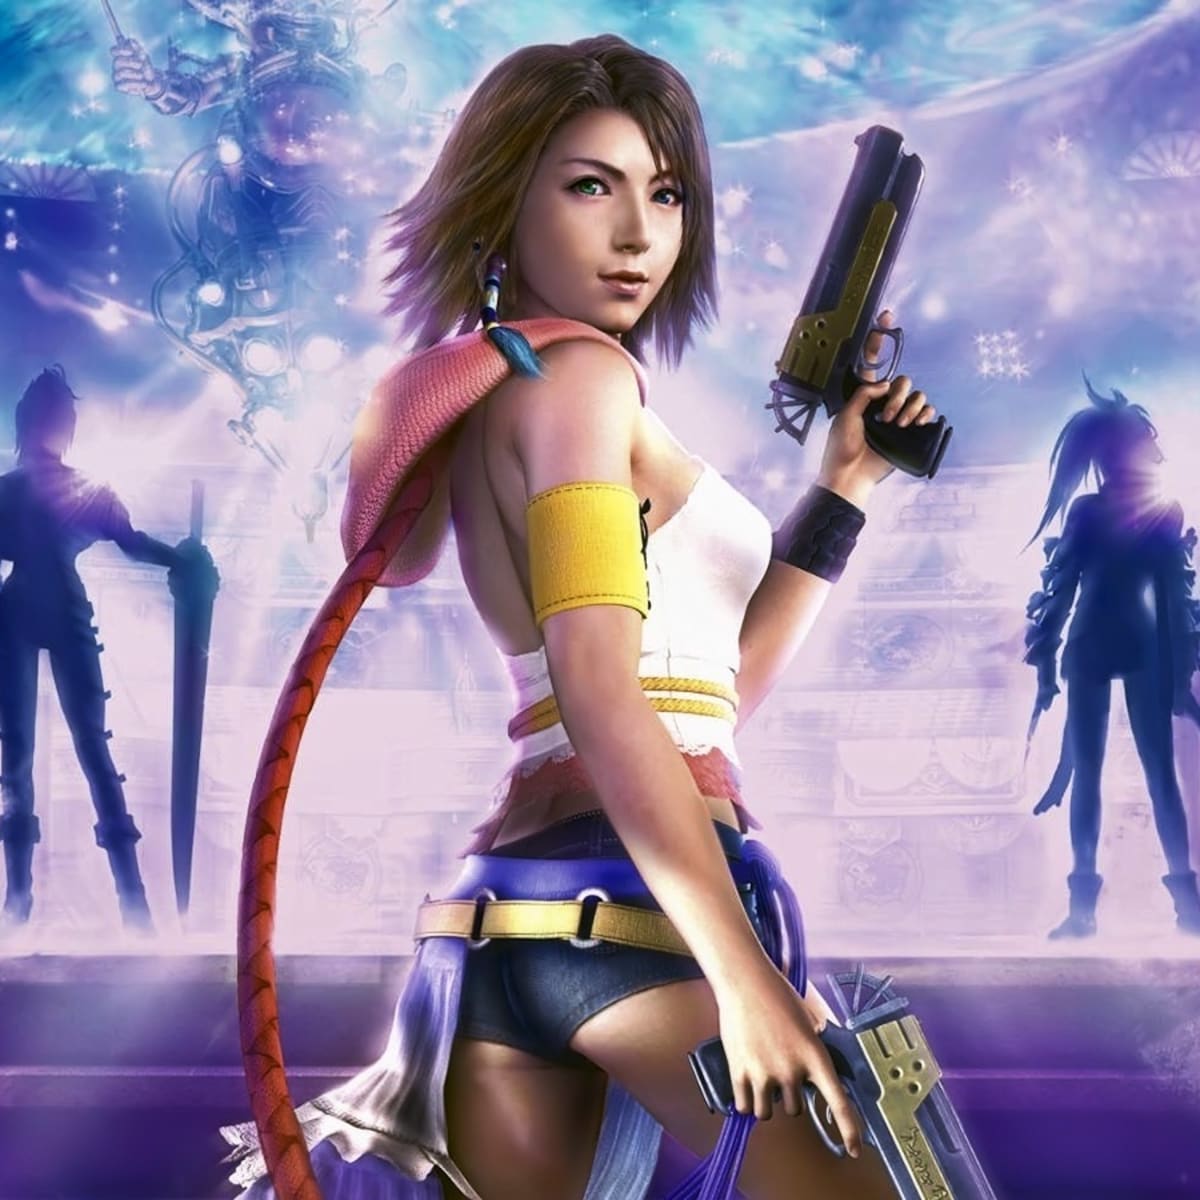 How To Get Unlimited Gil In Final Fantasy X 2 Hd Remaster Levelskip